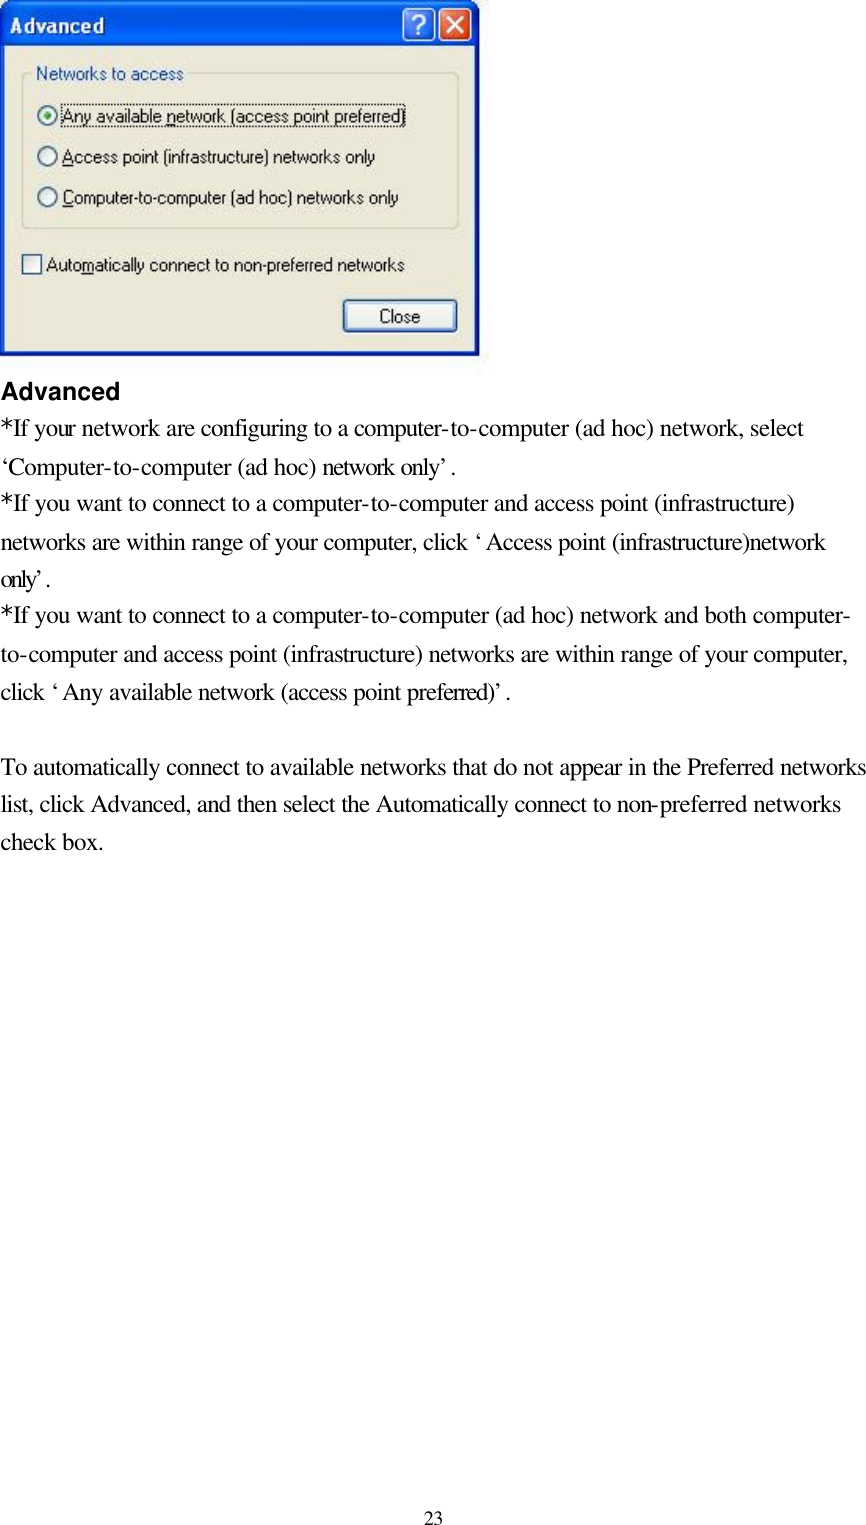  23 Advanced *If your network are configuring to a computer-to-computer (ad hoc) network, select ‘Computer-to-computer (ad hoc) network only’.  *If you want to connect to a computer-to-computer and access point (infrastructure) networks are within range of your computer, click ‘Access point (infrastructure)network only’.  *If you want to connect to a computer-to-computer (ad hoc) network and both computer-to-computer and access point (infrastructure) networks are within range of your computer, click ‘Any available network (access point preferred)’.   To automatically connect to available networks that do not appear in the Preferred networks list, click Advanced, and then select the Automatically connect to non-preferred networks check box.                